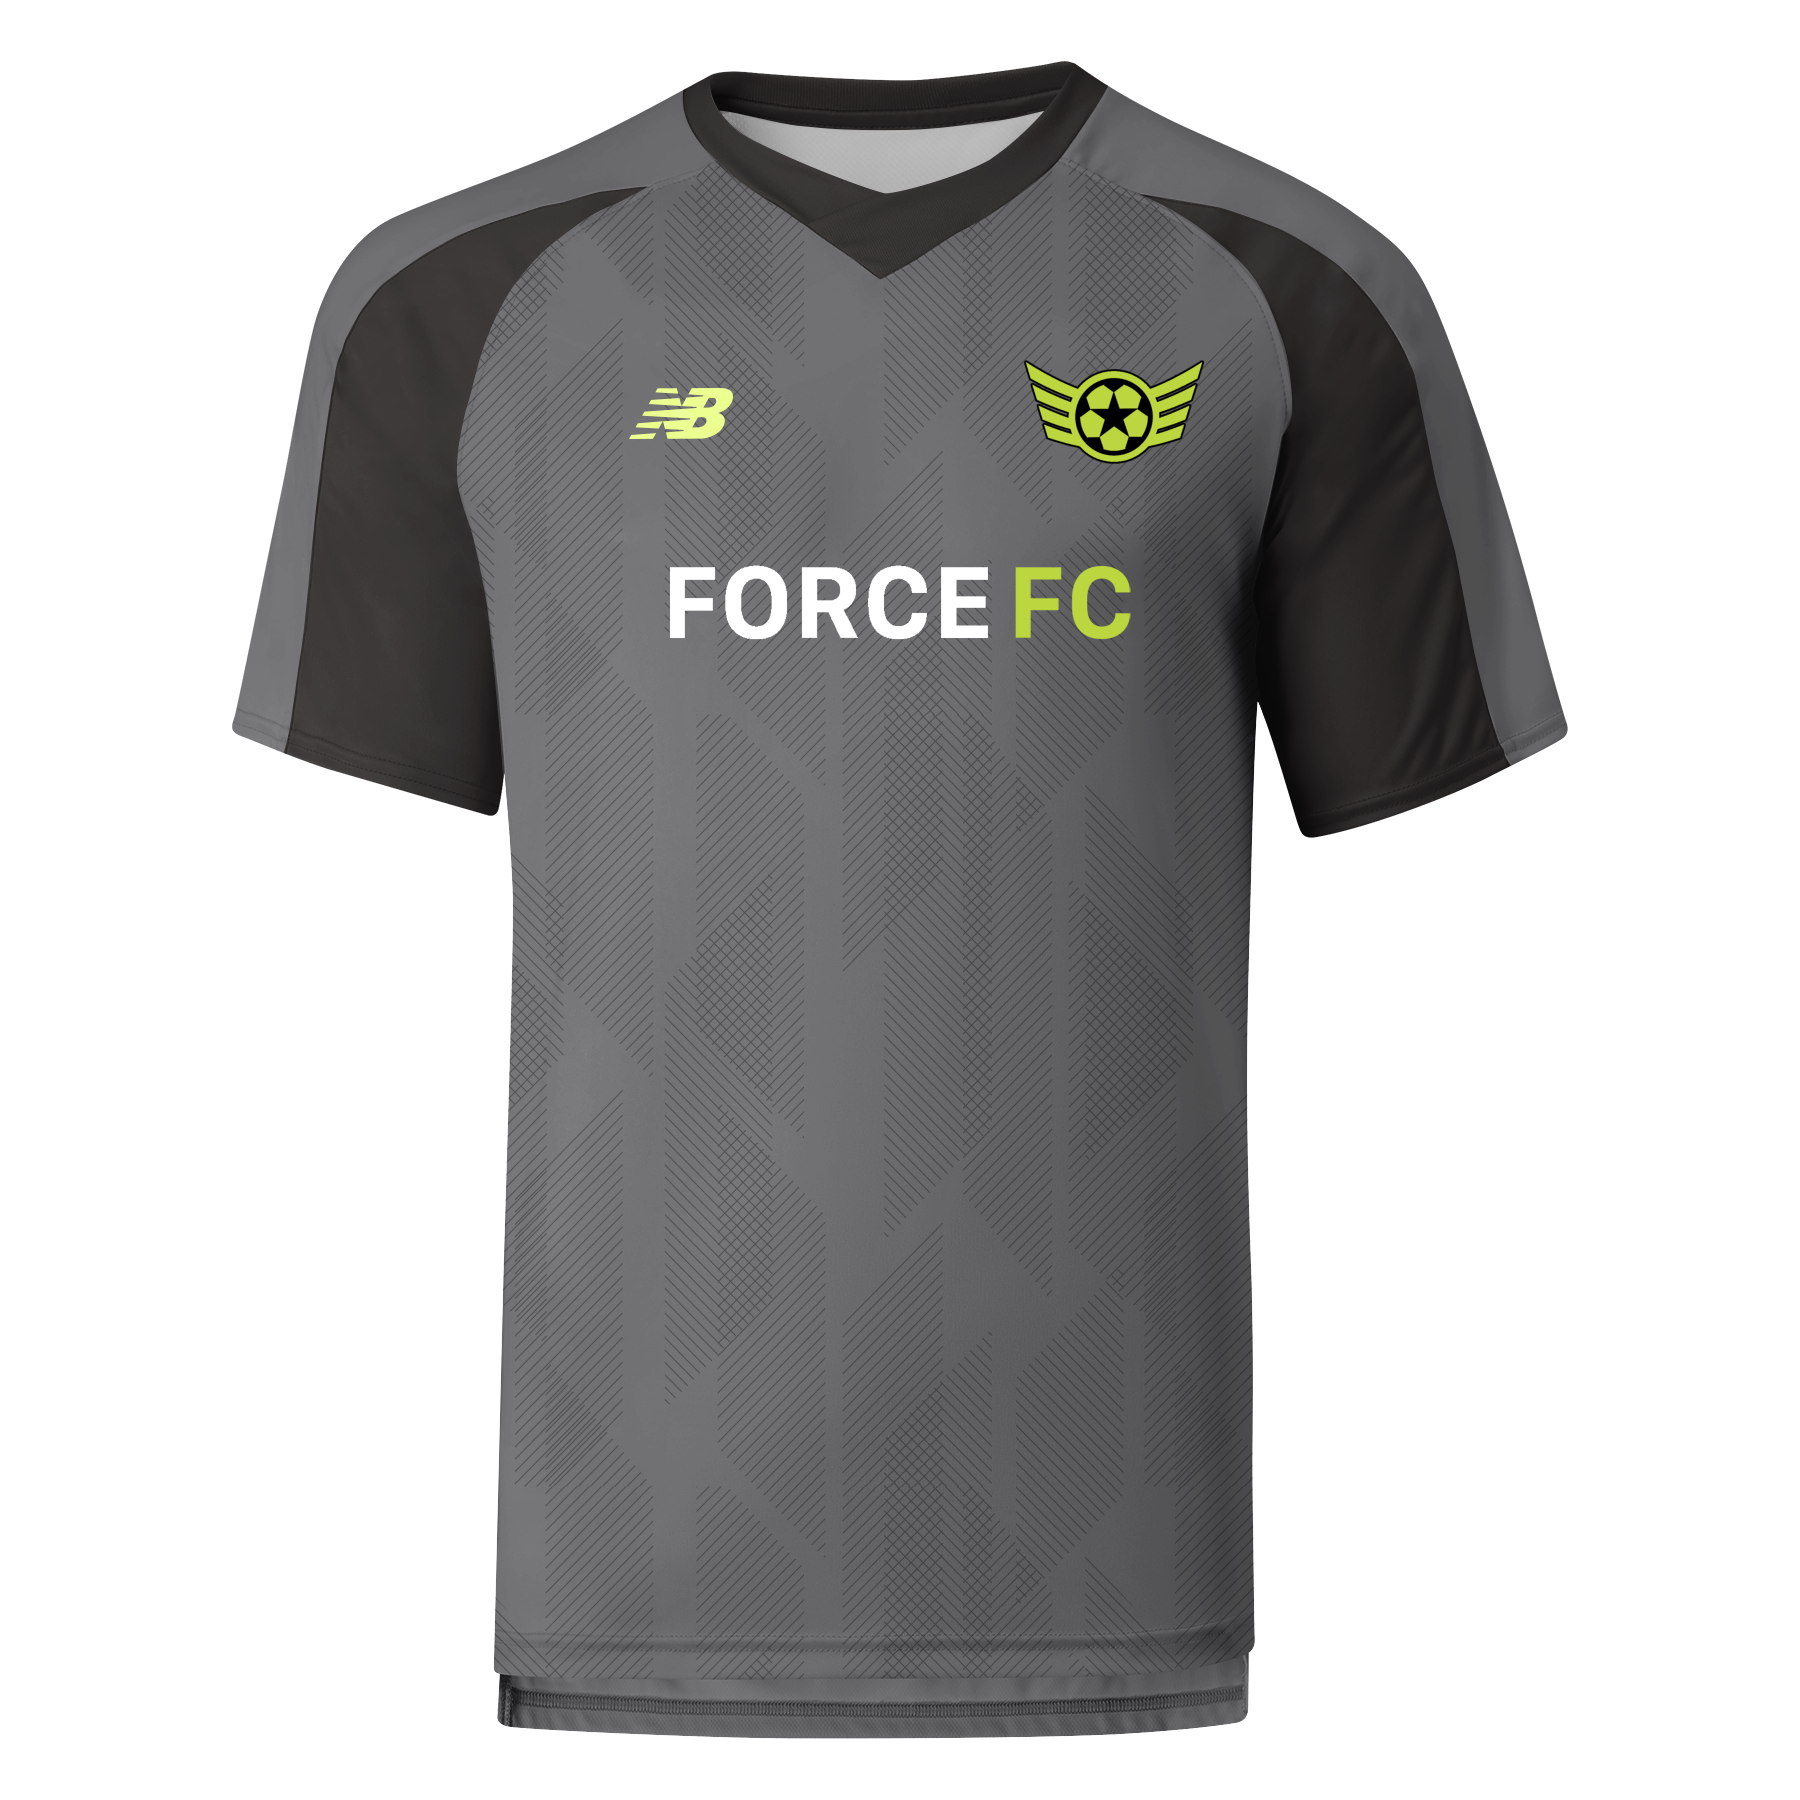 SD FORCE GREY JERSEY - MENS/WOMENS/YOUTH